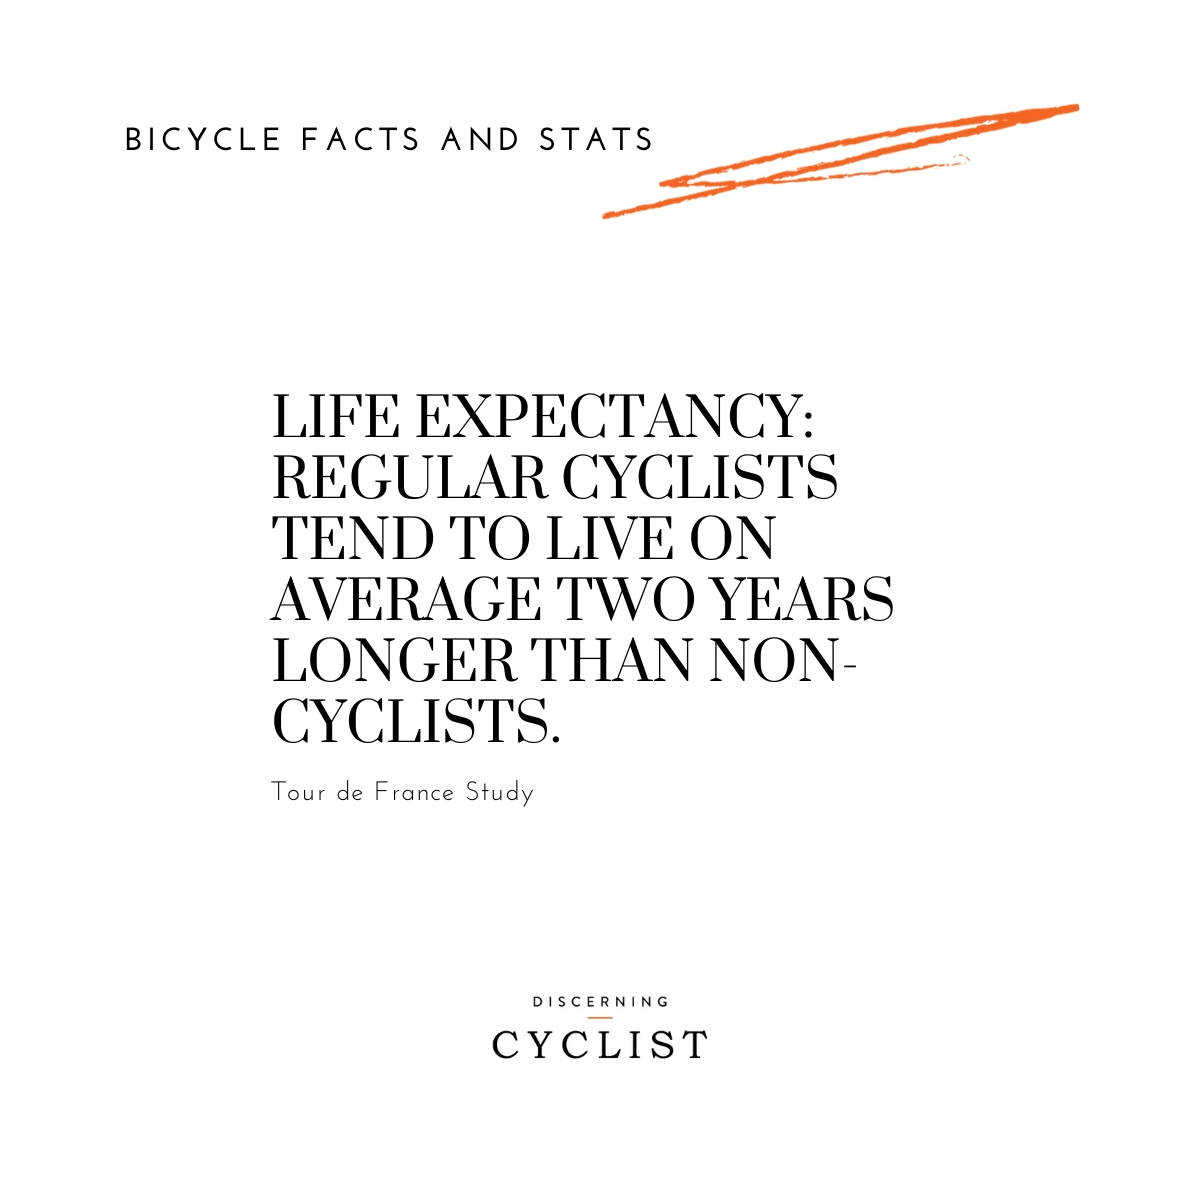 Life Expectancy: Regular cyclists tend to live on average two years longer than non-cyclists.